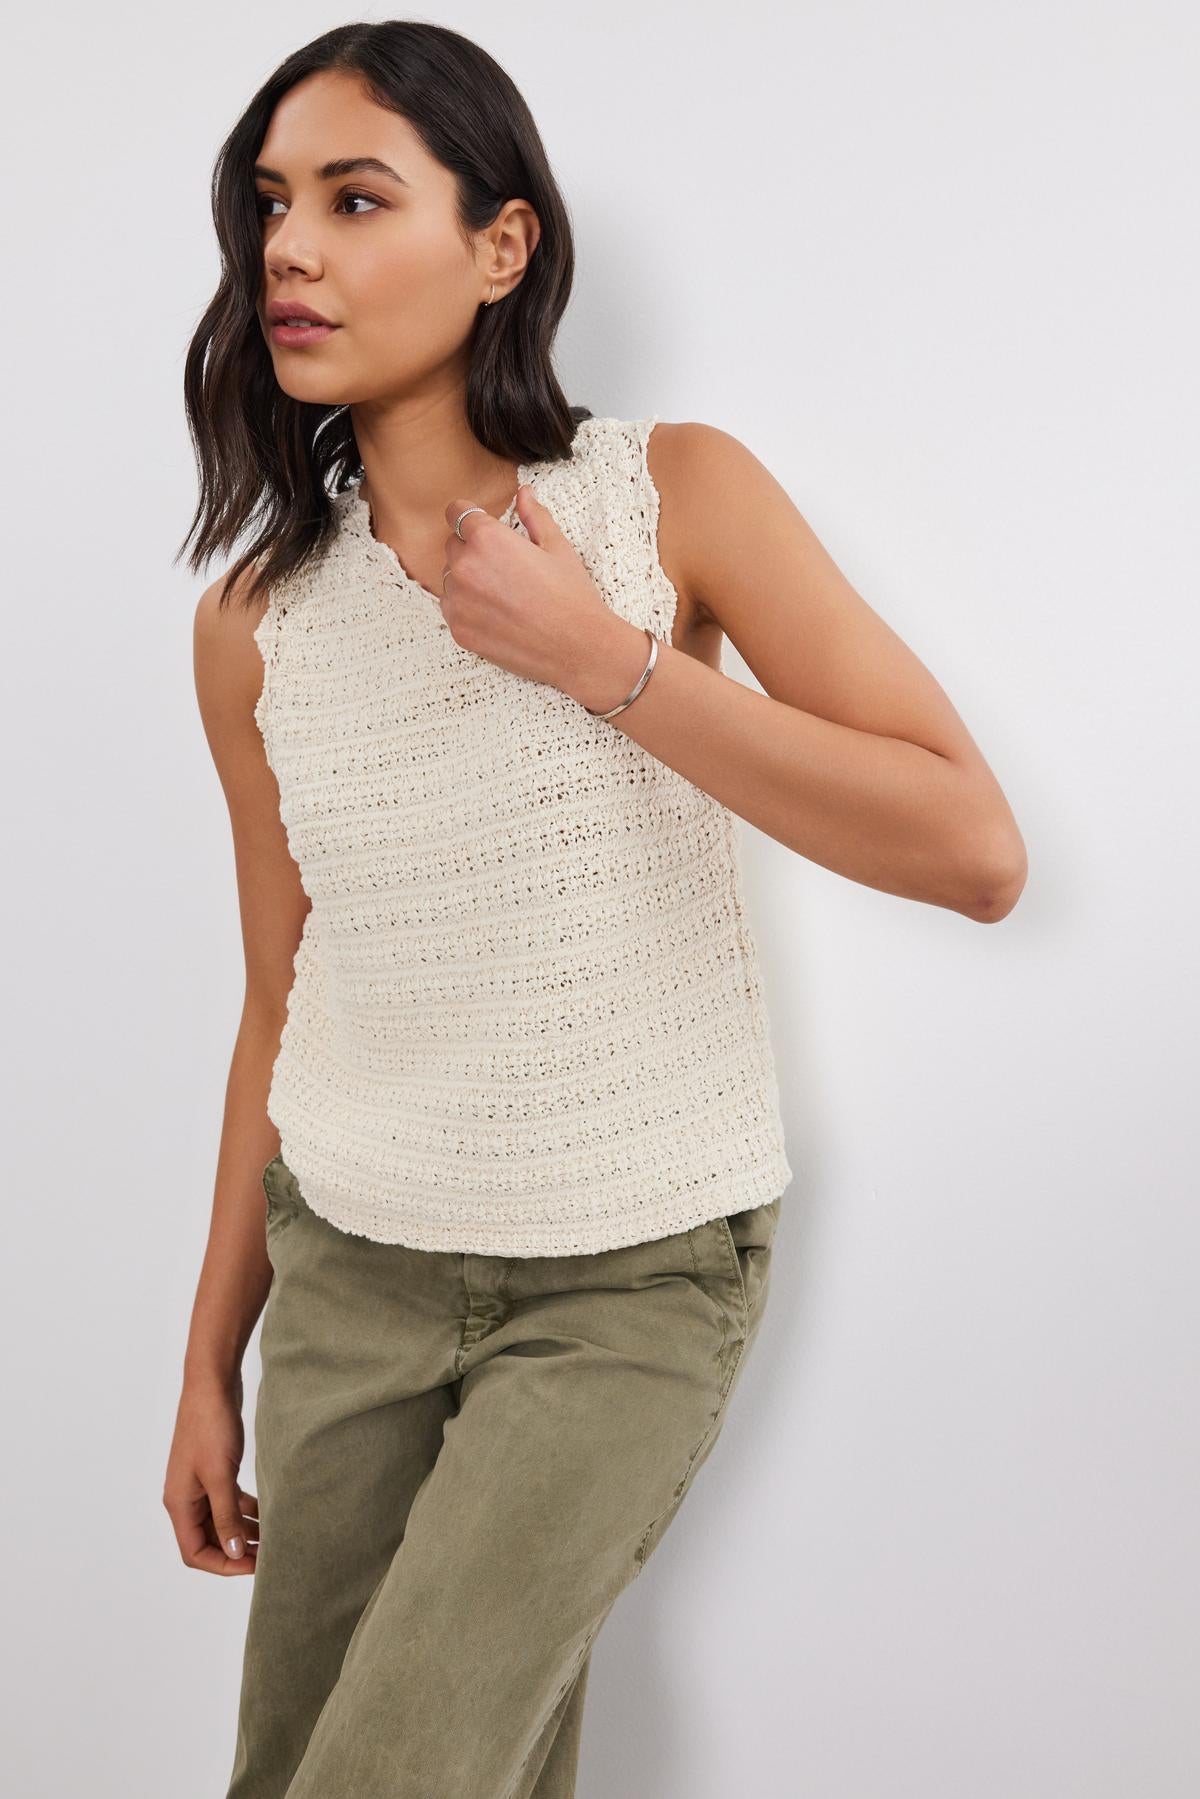 A person wearing a sleeveless, cream-colored SOPHIE SWEATER VEST by Velvet by Graham & Spencer with scallop details and olive green pants stands against a white wall.-37054560370881